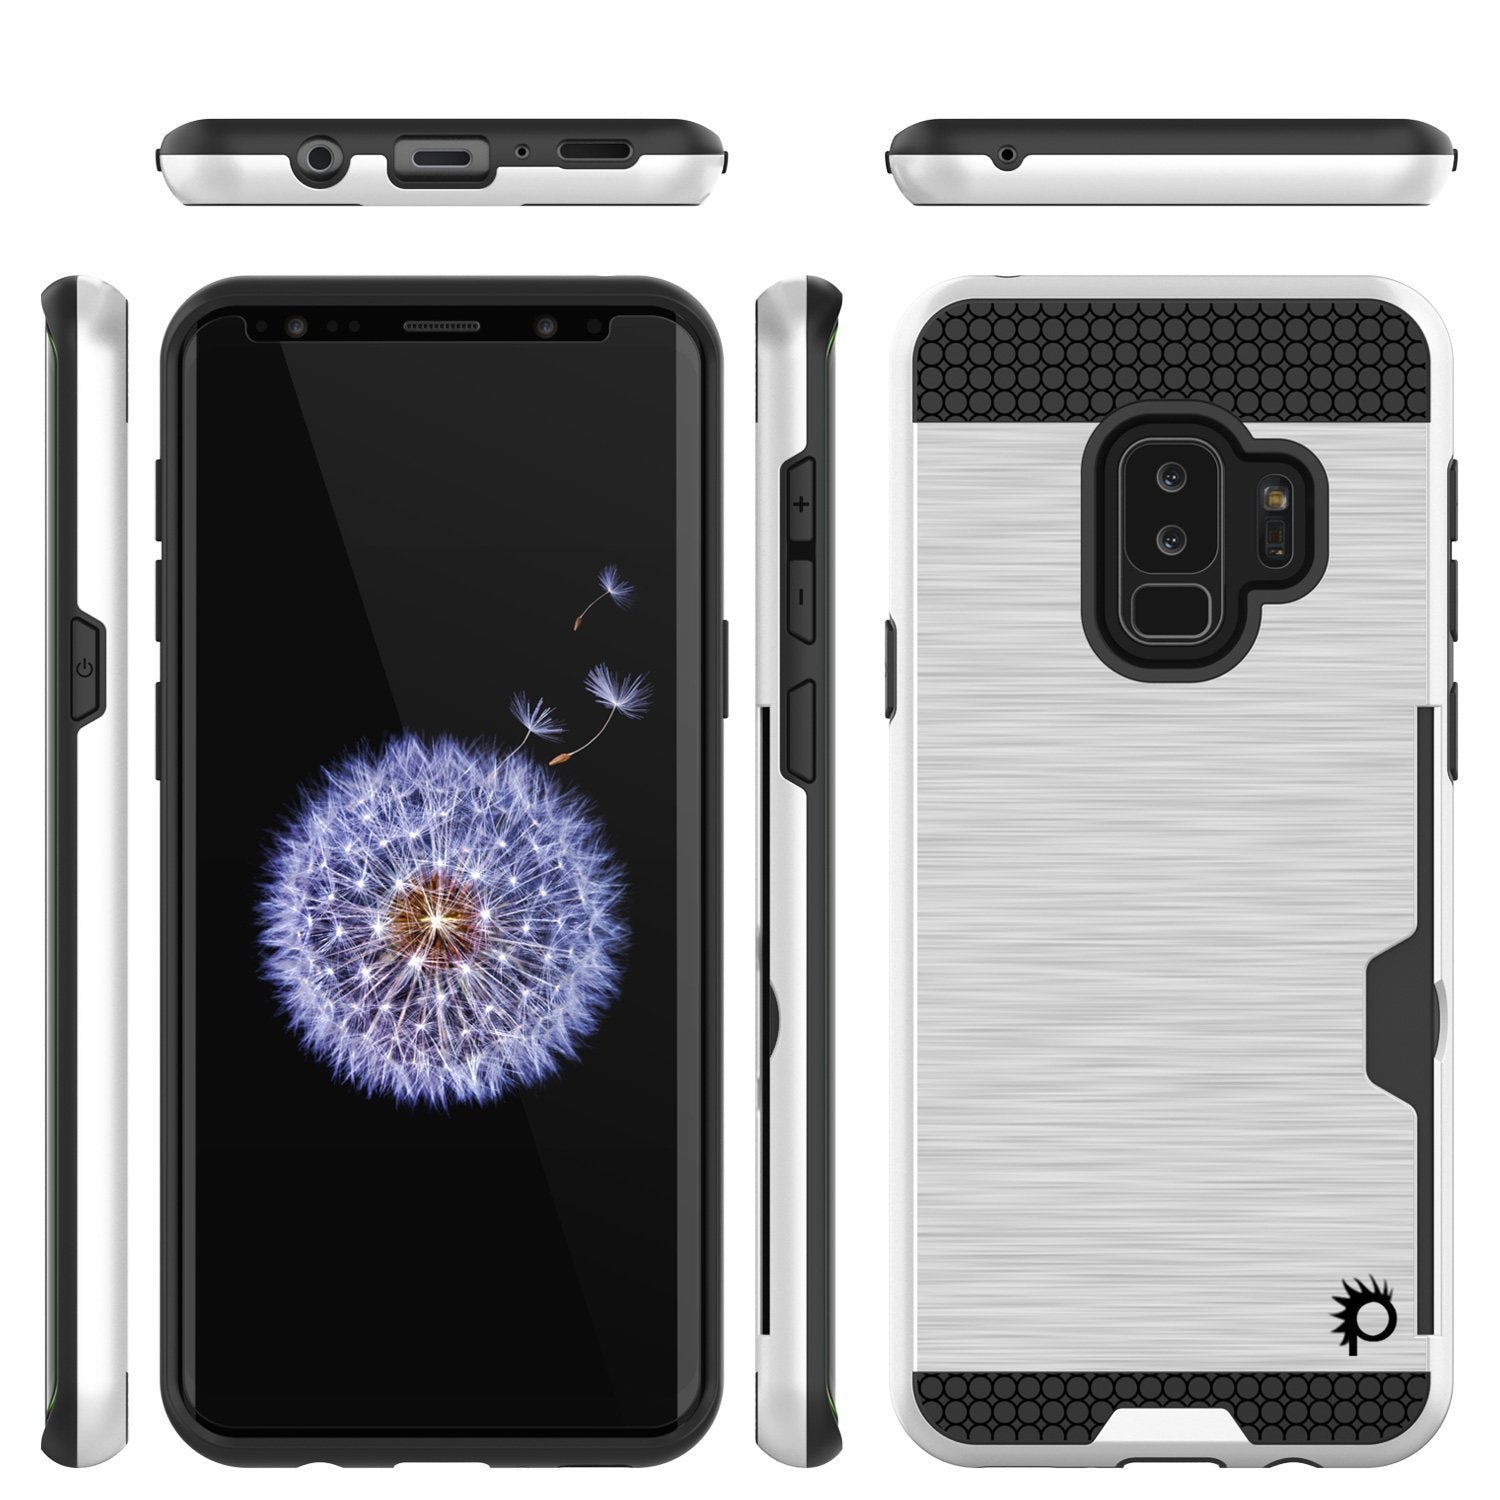 Galaxy S9 Plus Case, PUNKcase [SLOT Series] [Slim Fit] Dual-Layer Armor Cover w/Integrated Anti-Shock System, Credit Card Slot & Screen Protector [White] - PunkCase NZ